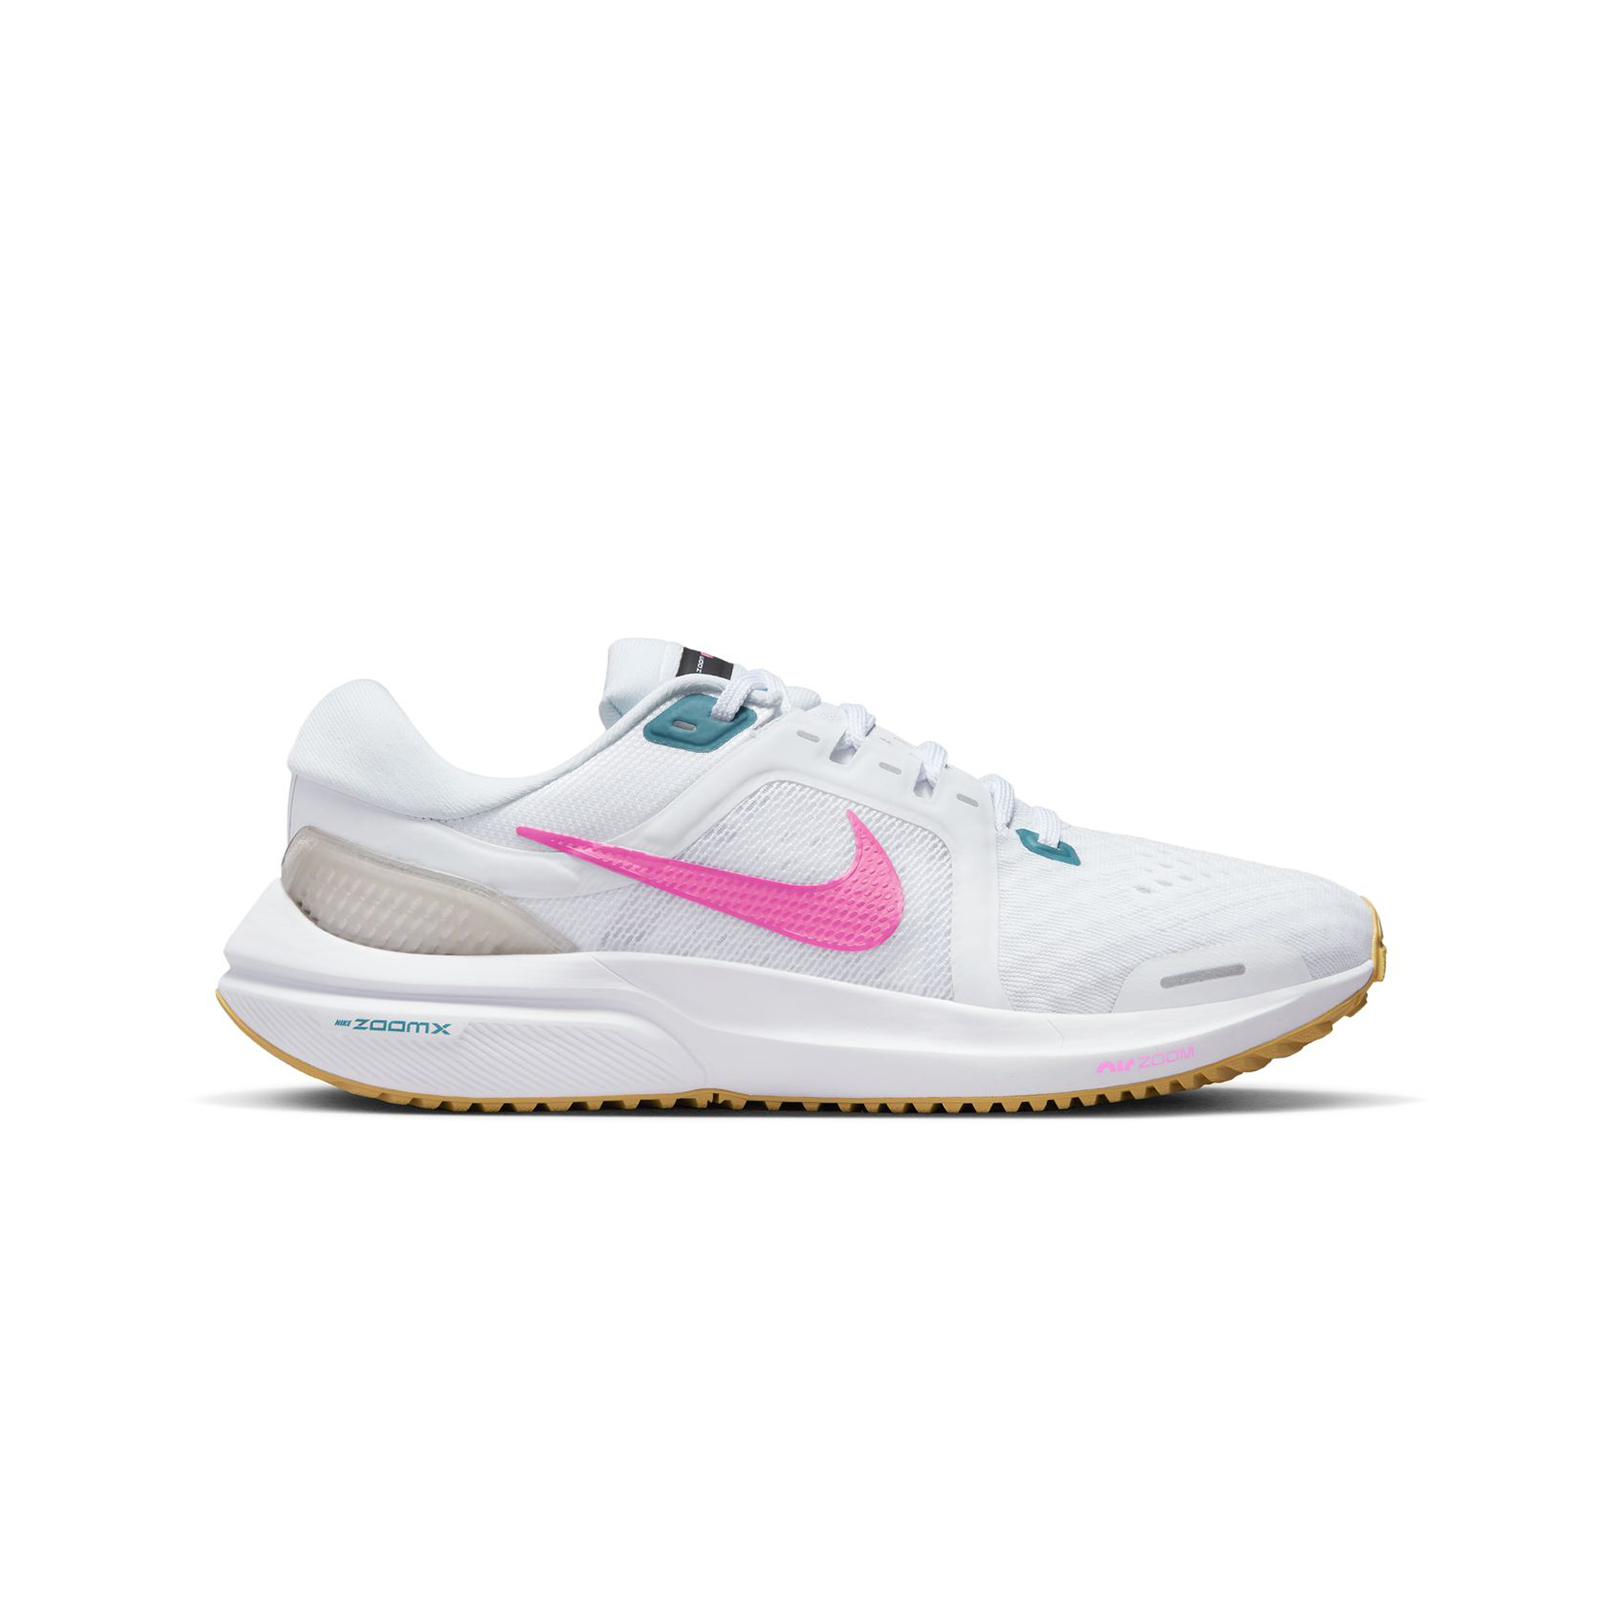 Nike - NIKE AIR ZOOM VOMERO 16 - WHITE/PINK SPELL-NOISE AQUA-WHEAT GOLD Γυναικεία > Παπούτσια > Αθλητικά > Παπούτσι Low Cut